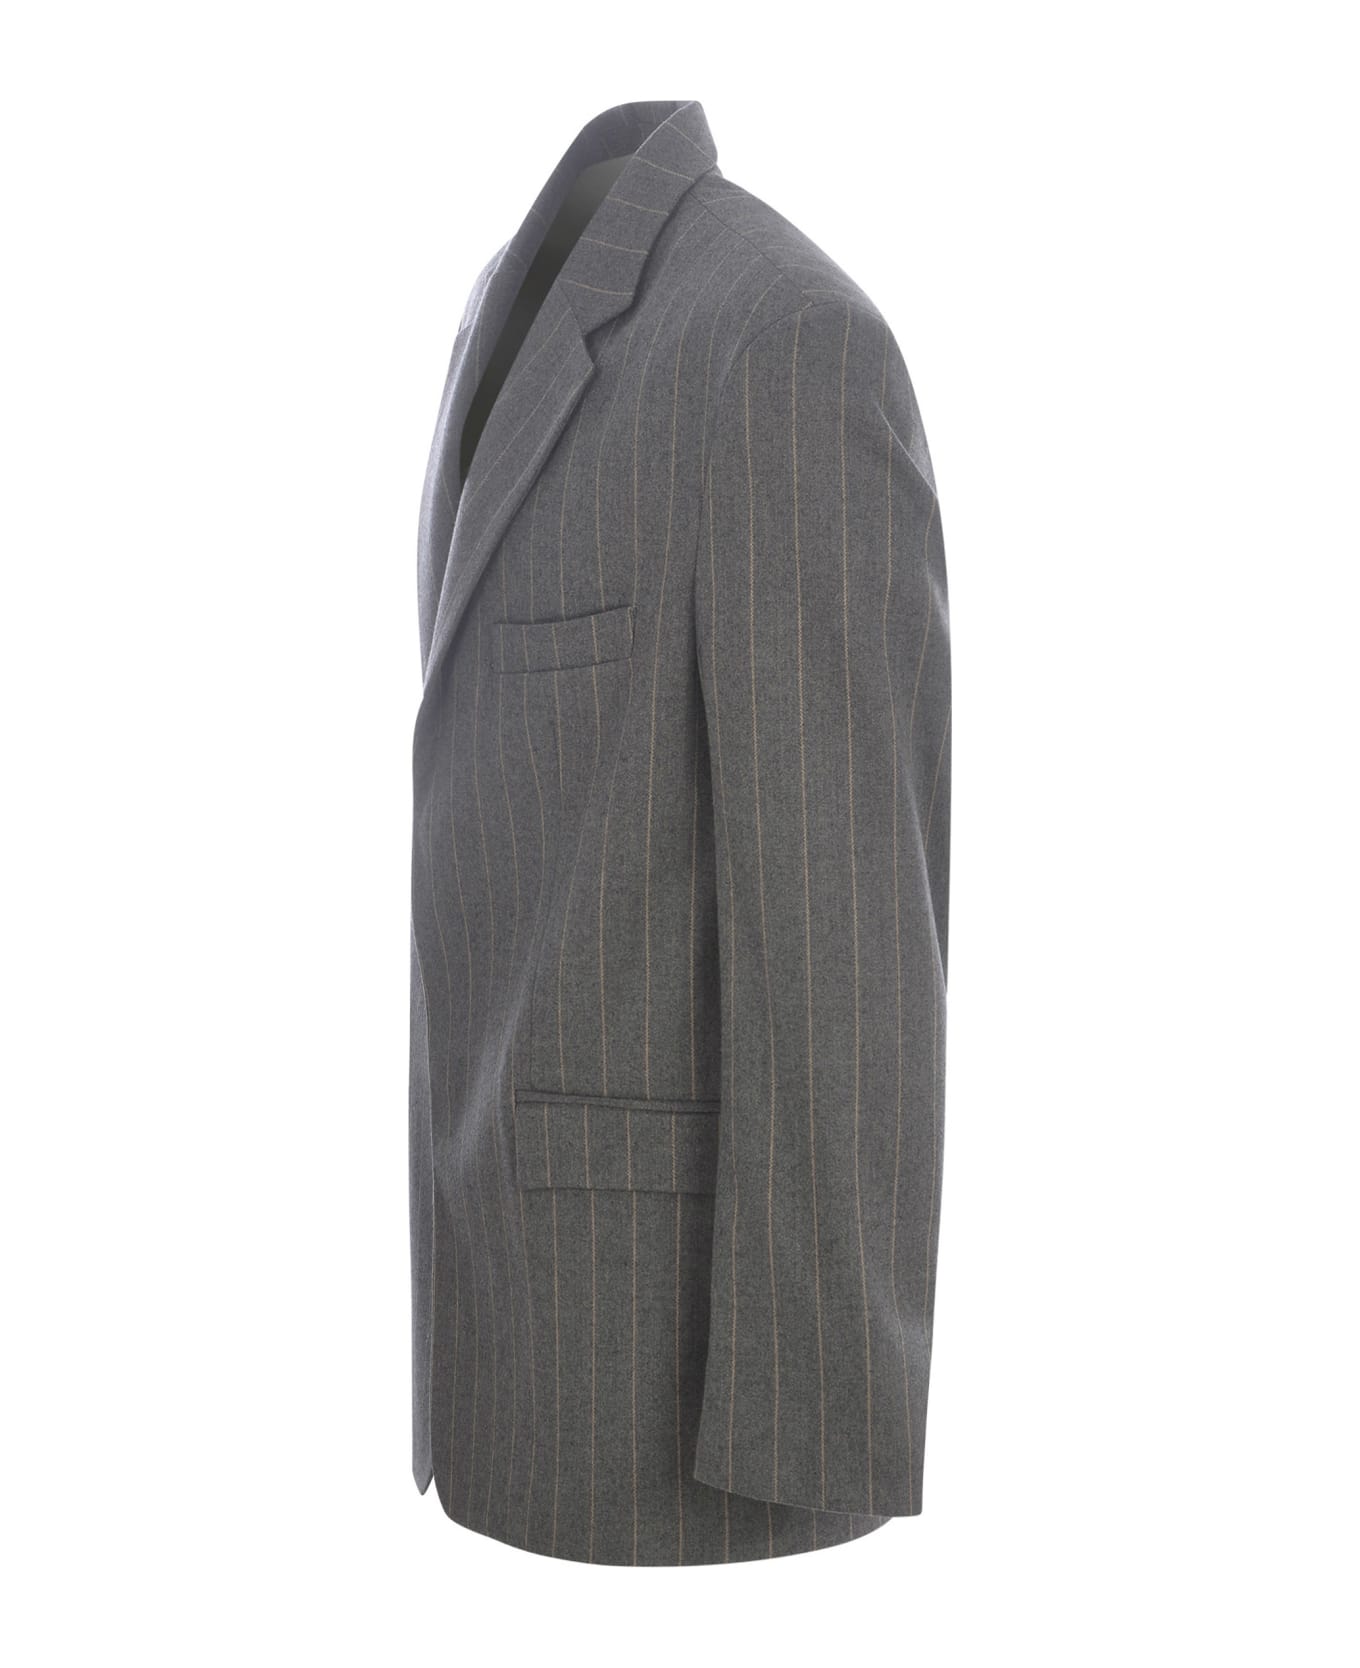 Family First Milano Single-breasted Jacket Family First In Wool Blend - Grigio